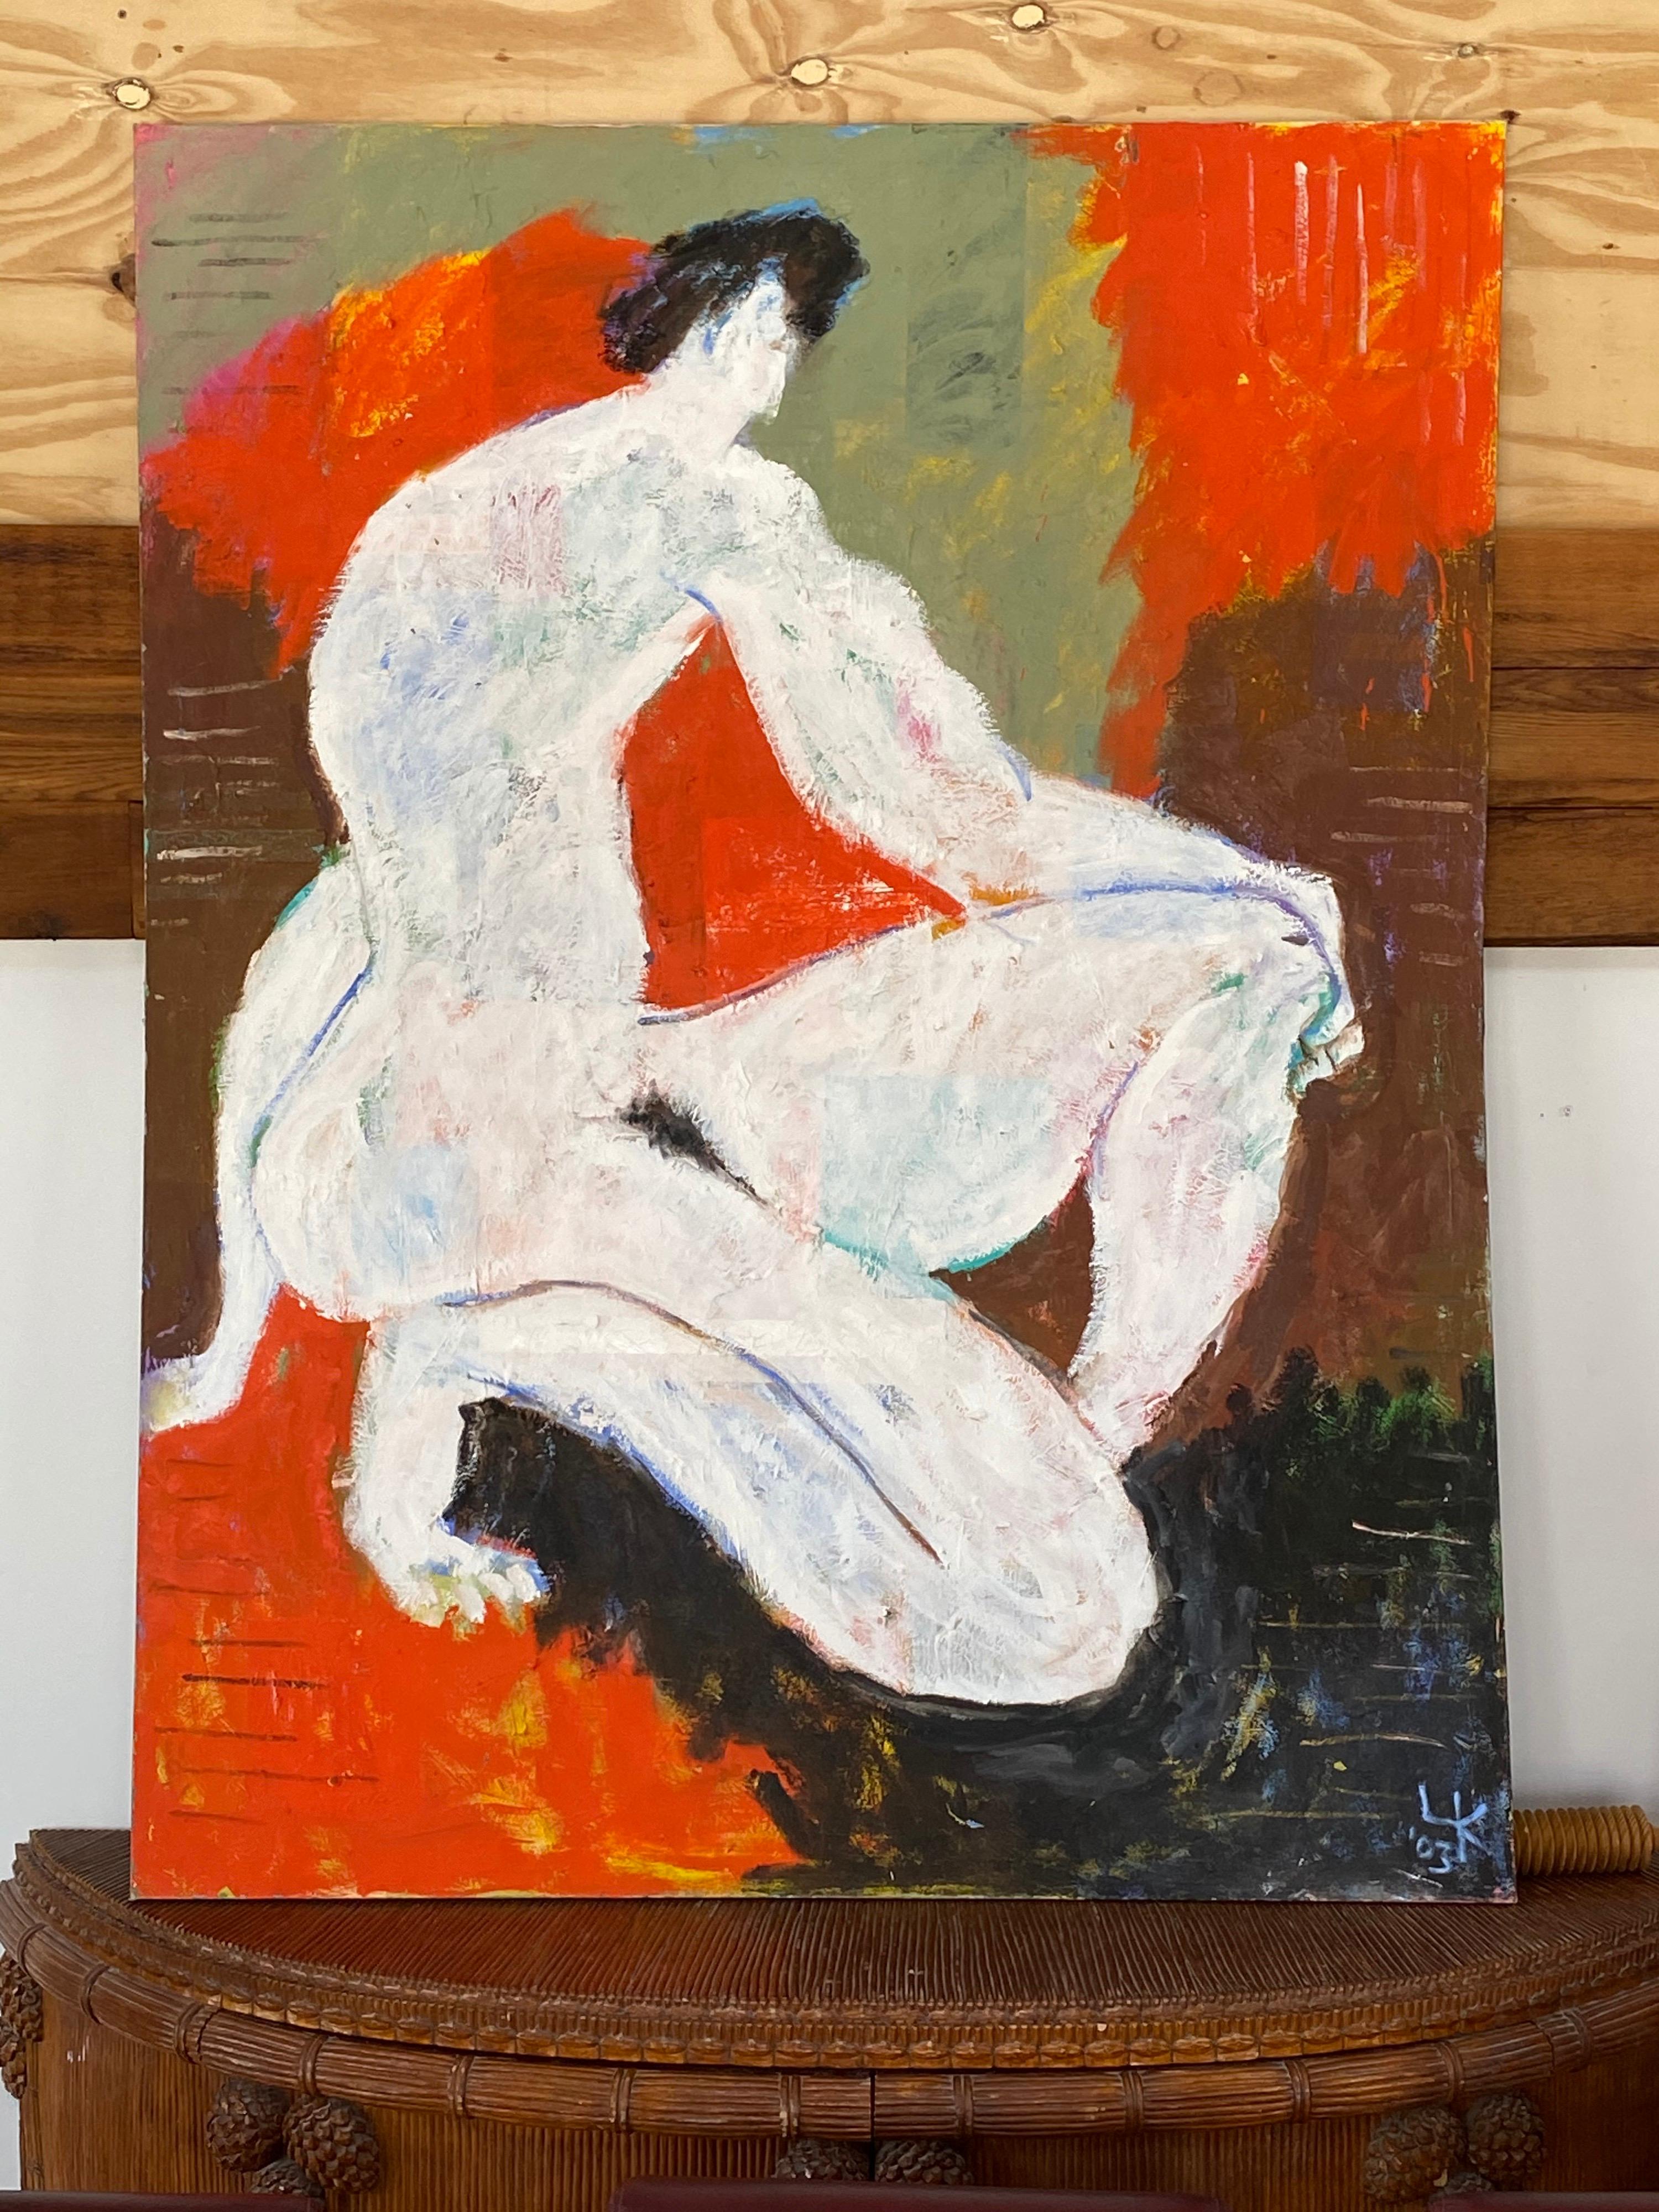 Large modern nude painting by Larry Kessler. Has beautiful texture and brush mark. Signed LK and dated 03.